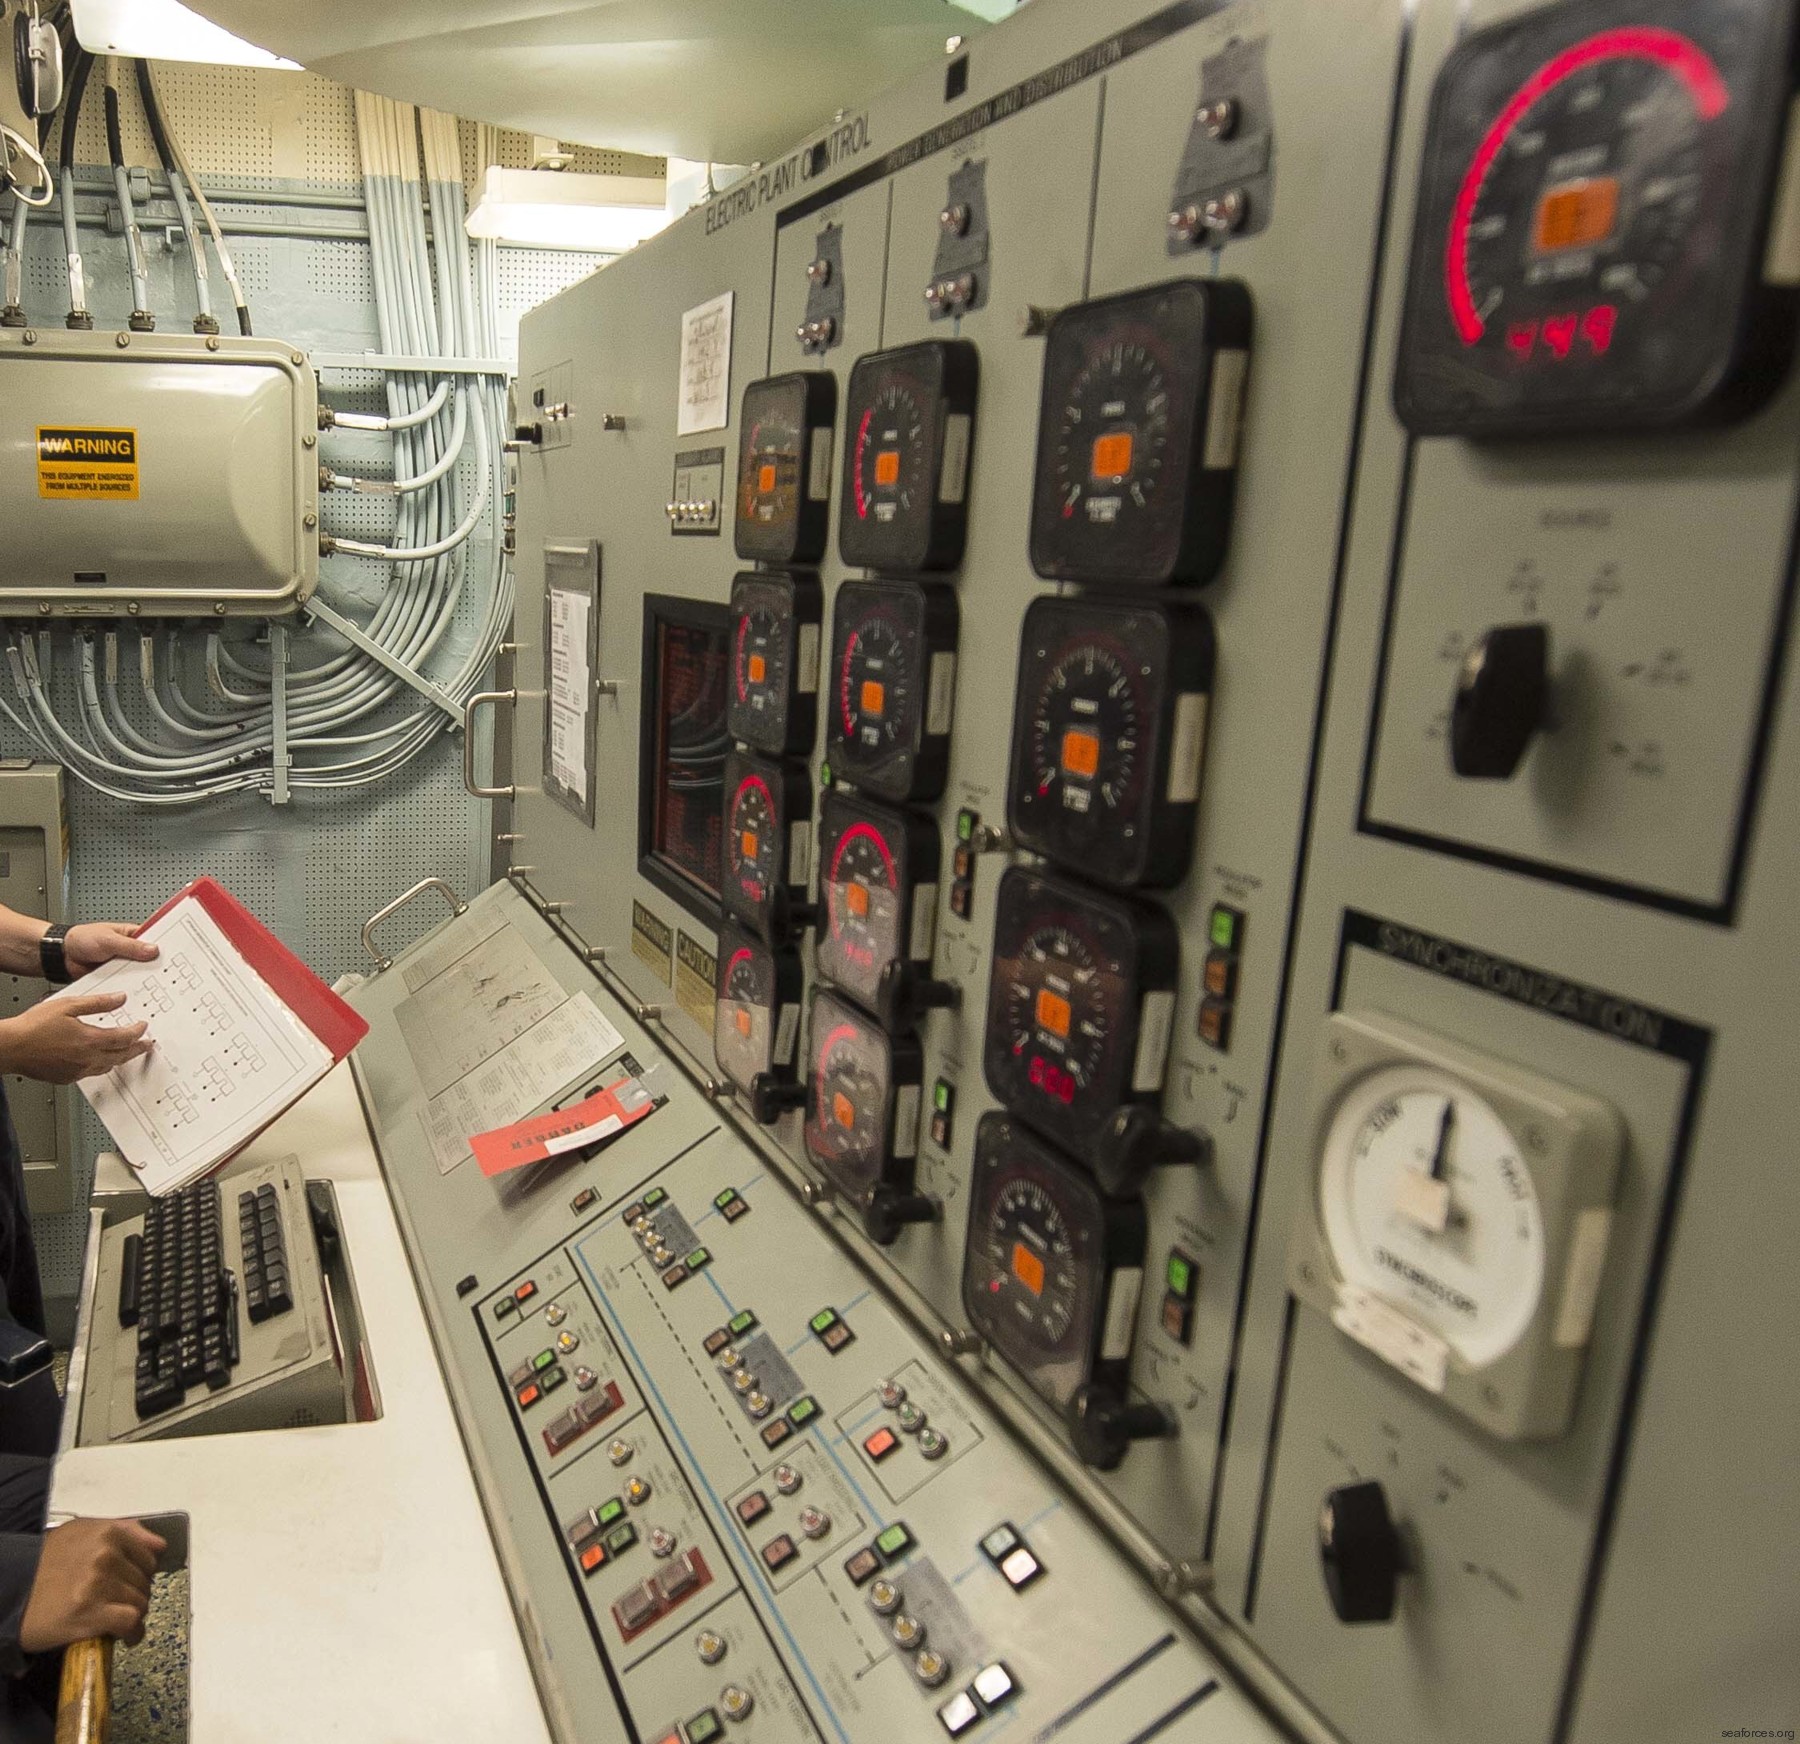 ddg-71 uss ross guided missile destroyer arleigh burke class aegis bmd 51 electric plant control console